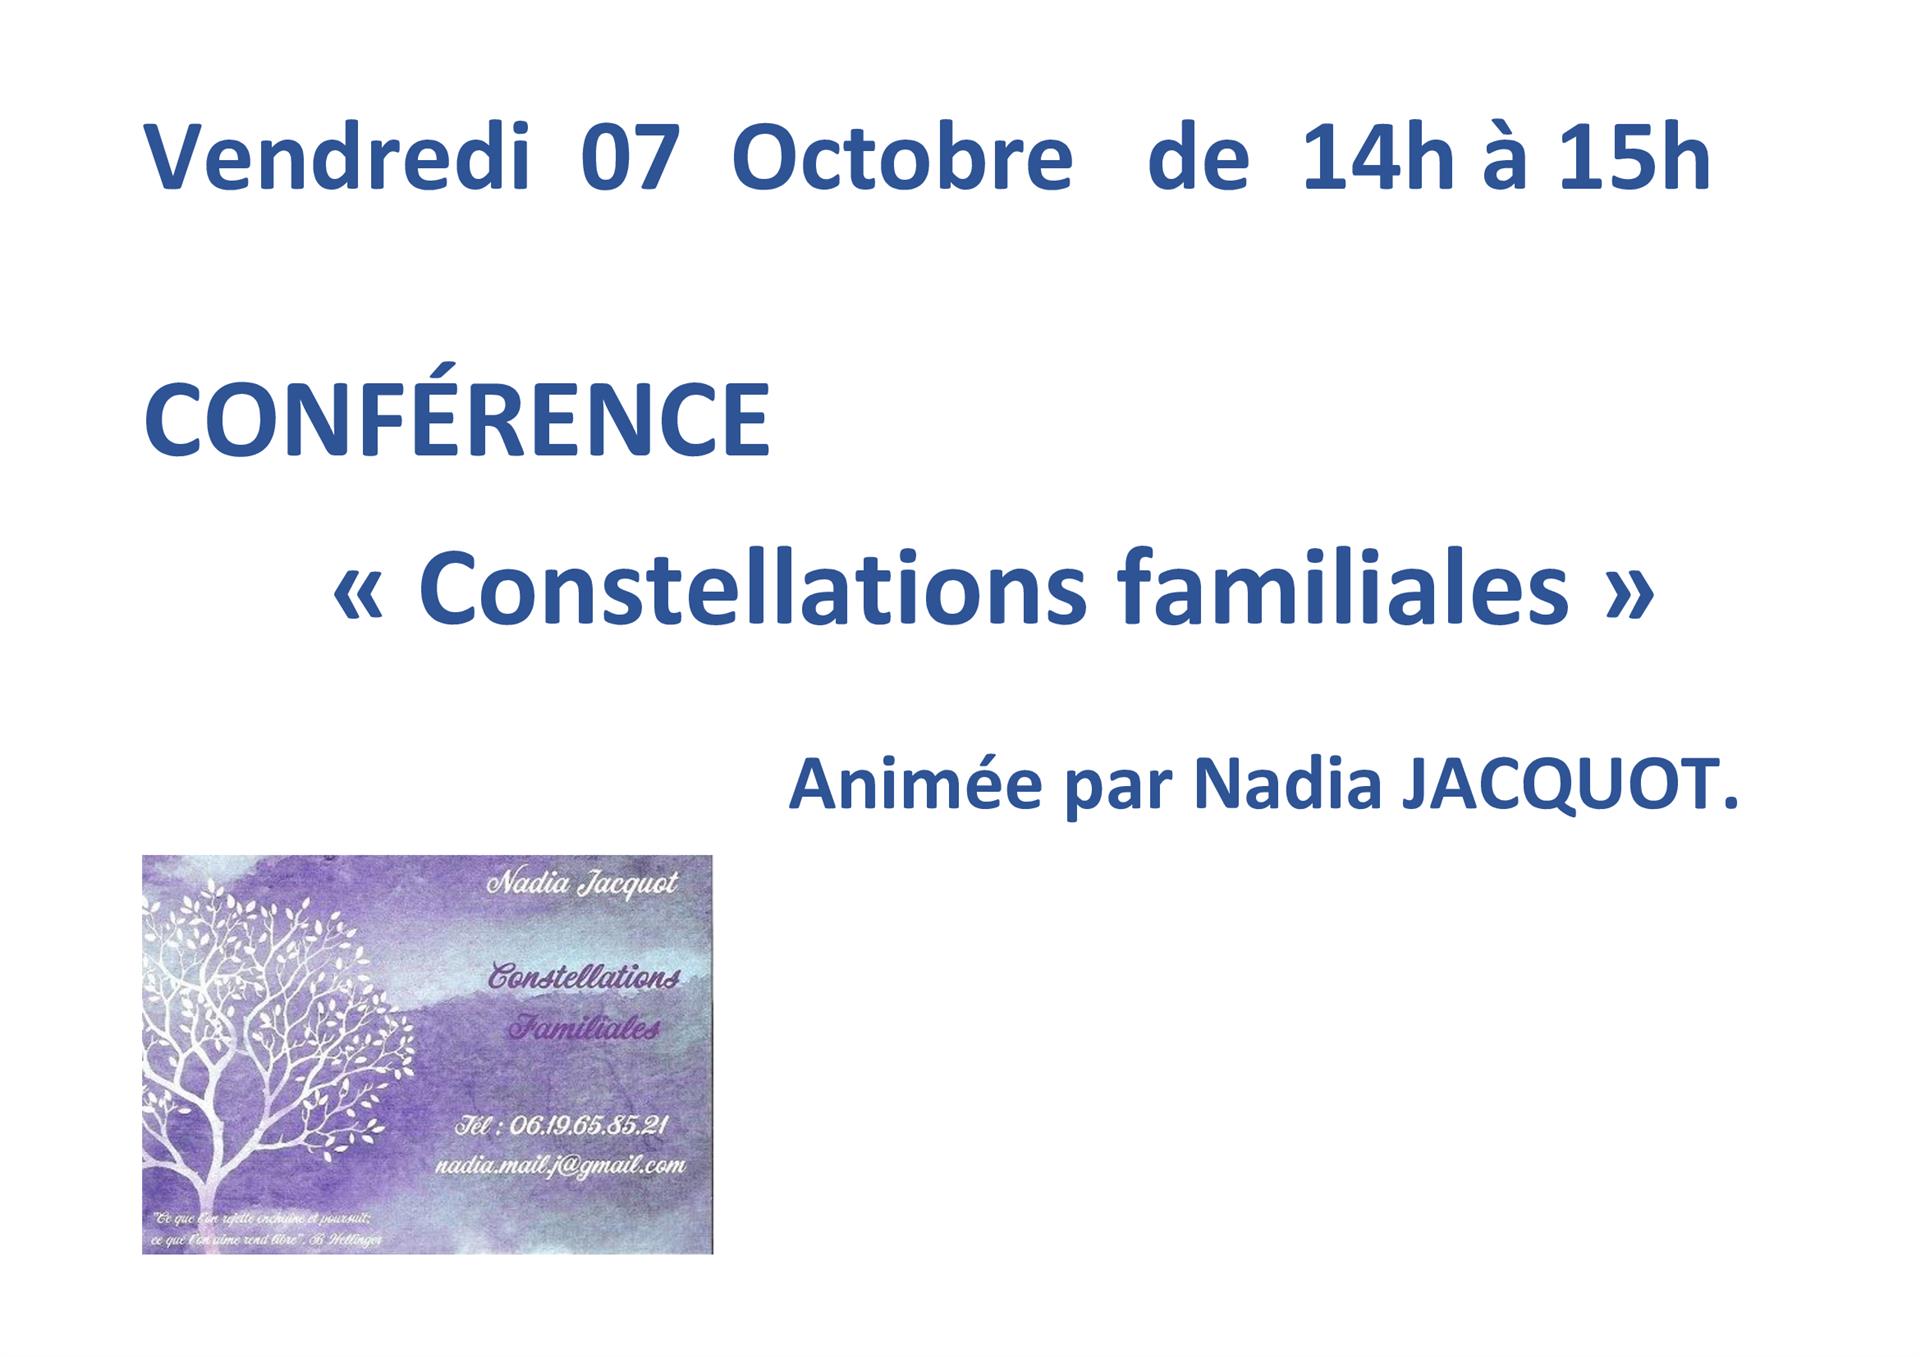 CONFERENCE (CONSTELLATIONS FAMILIALES)